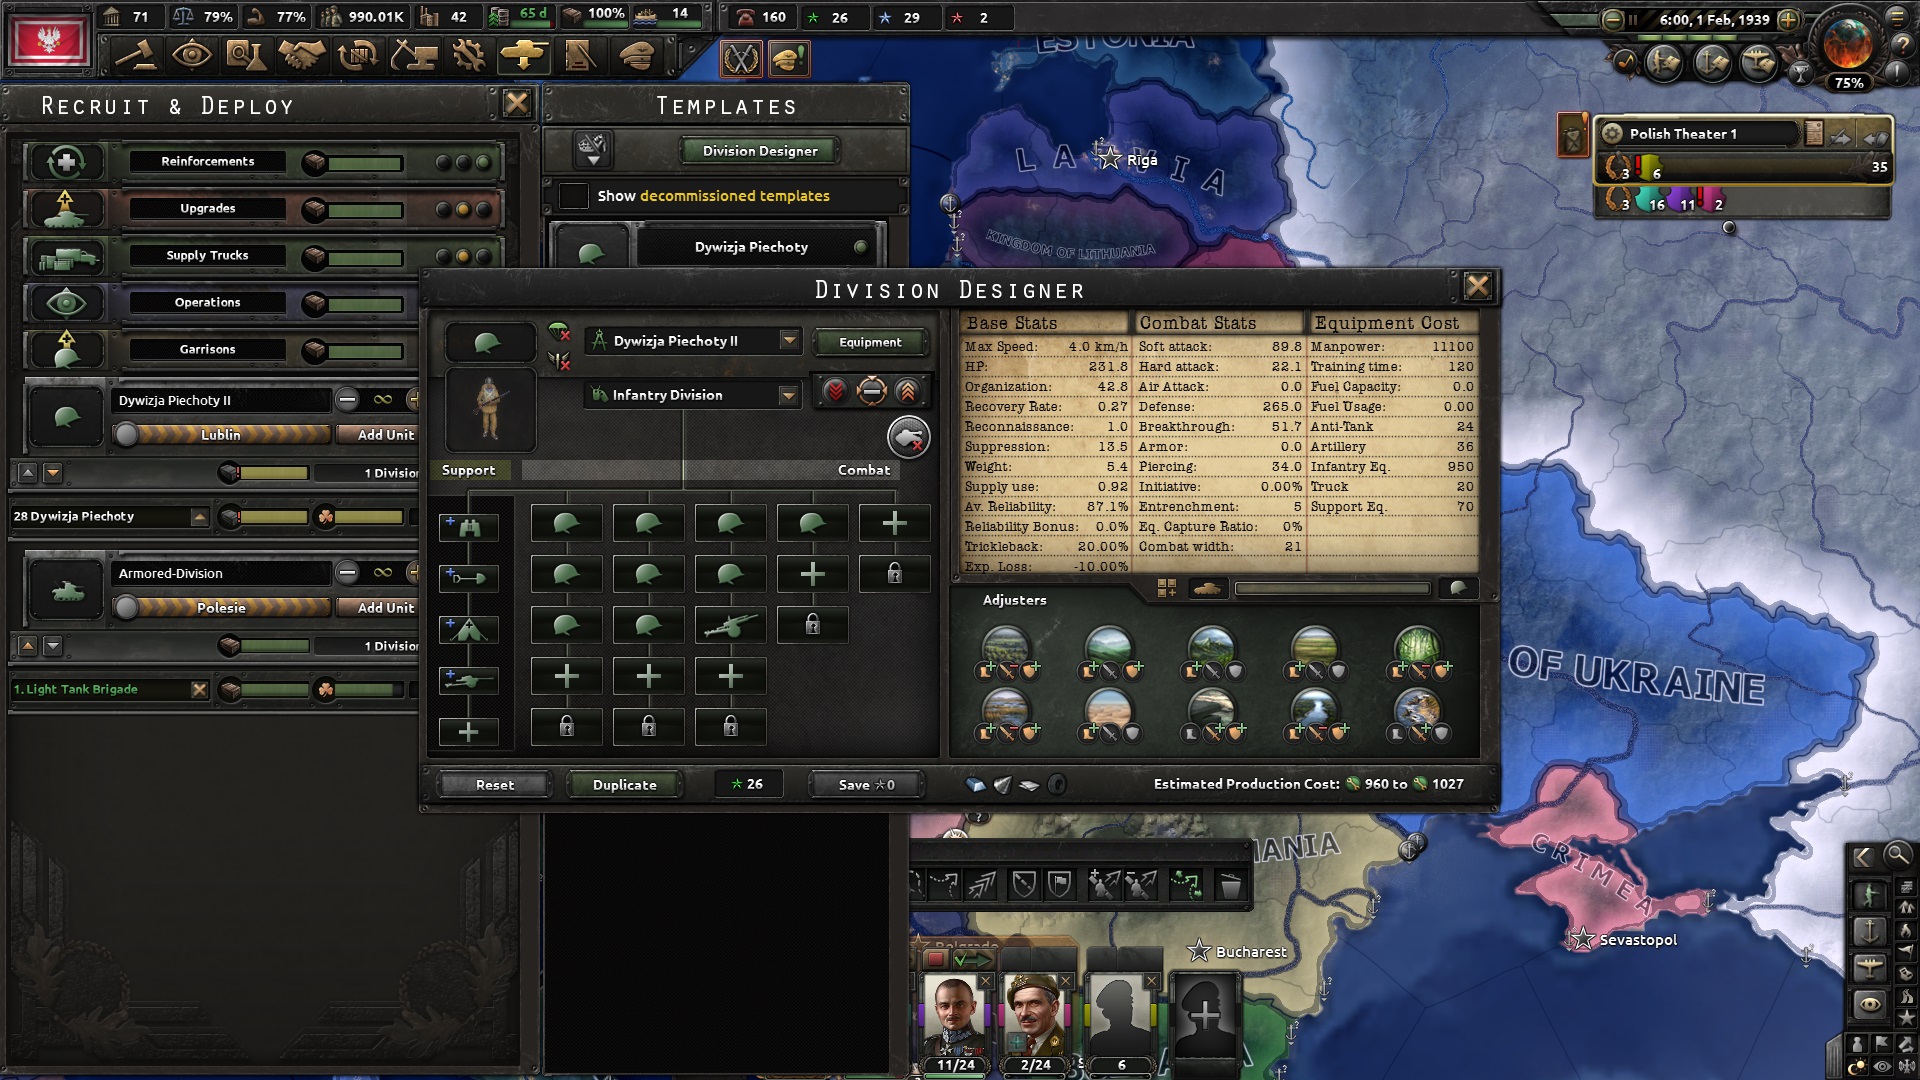 Hearts of Iron 4 meta combat width division templates and more